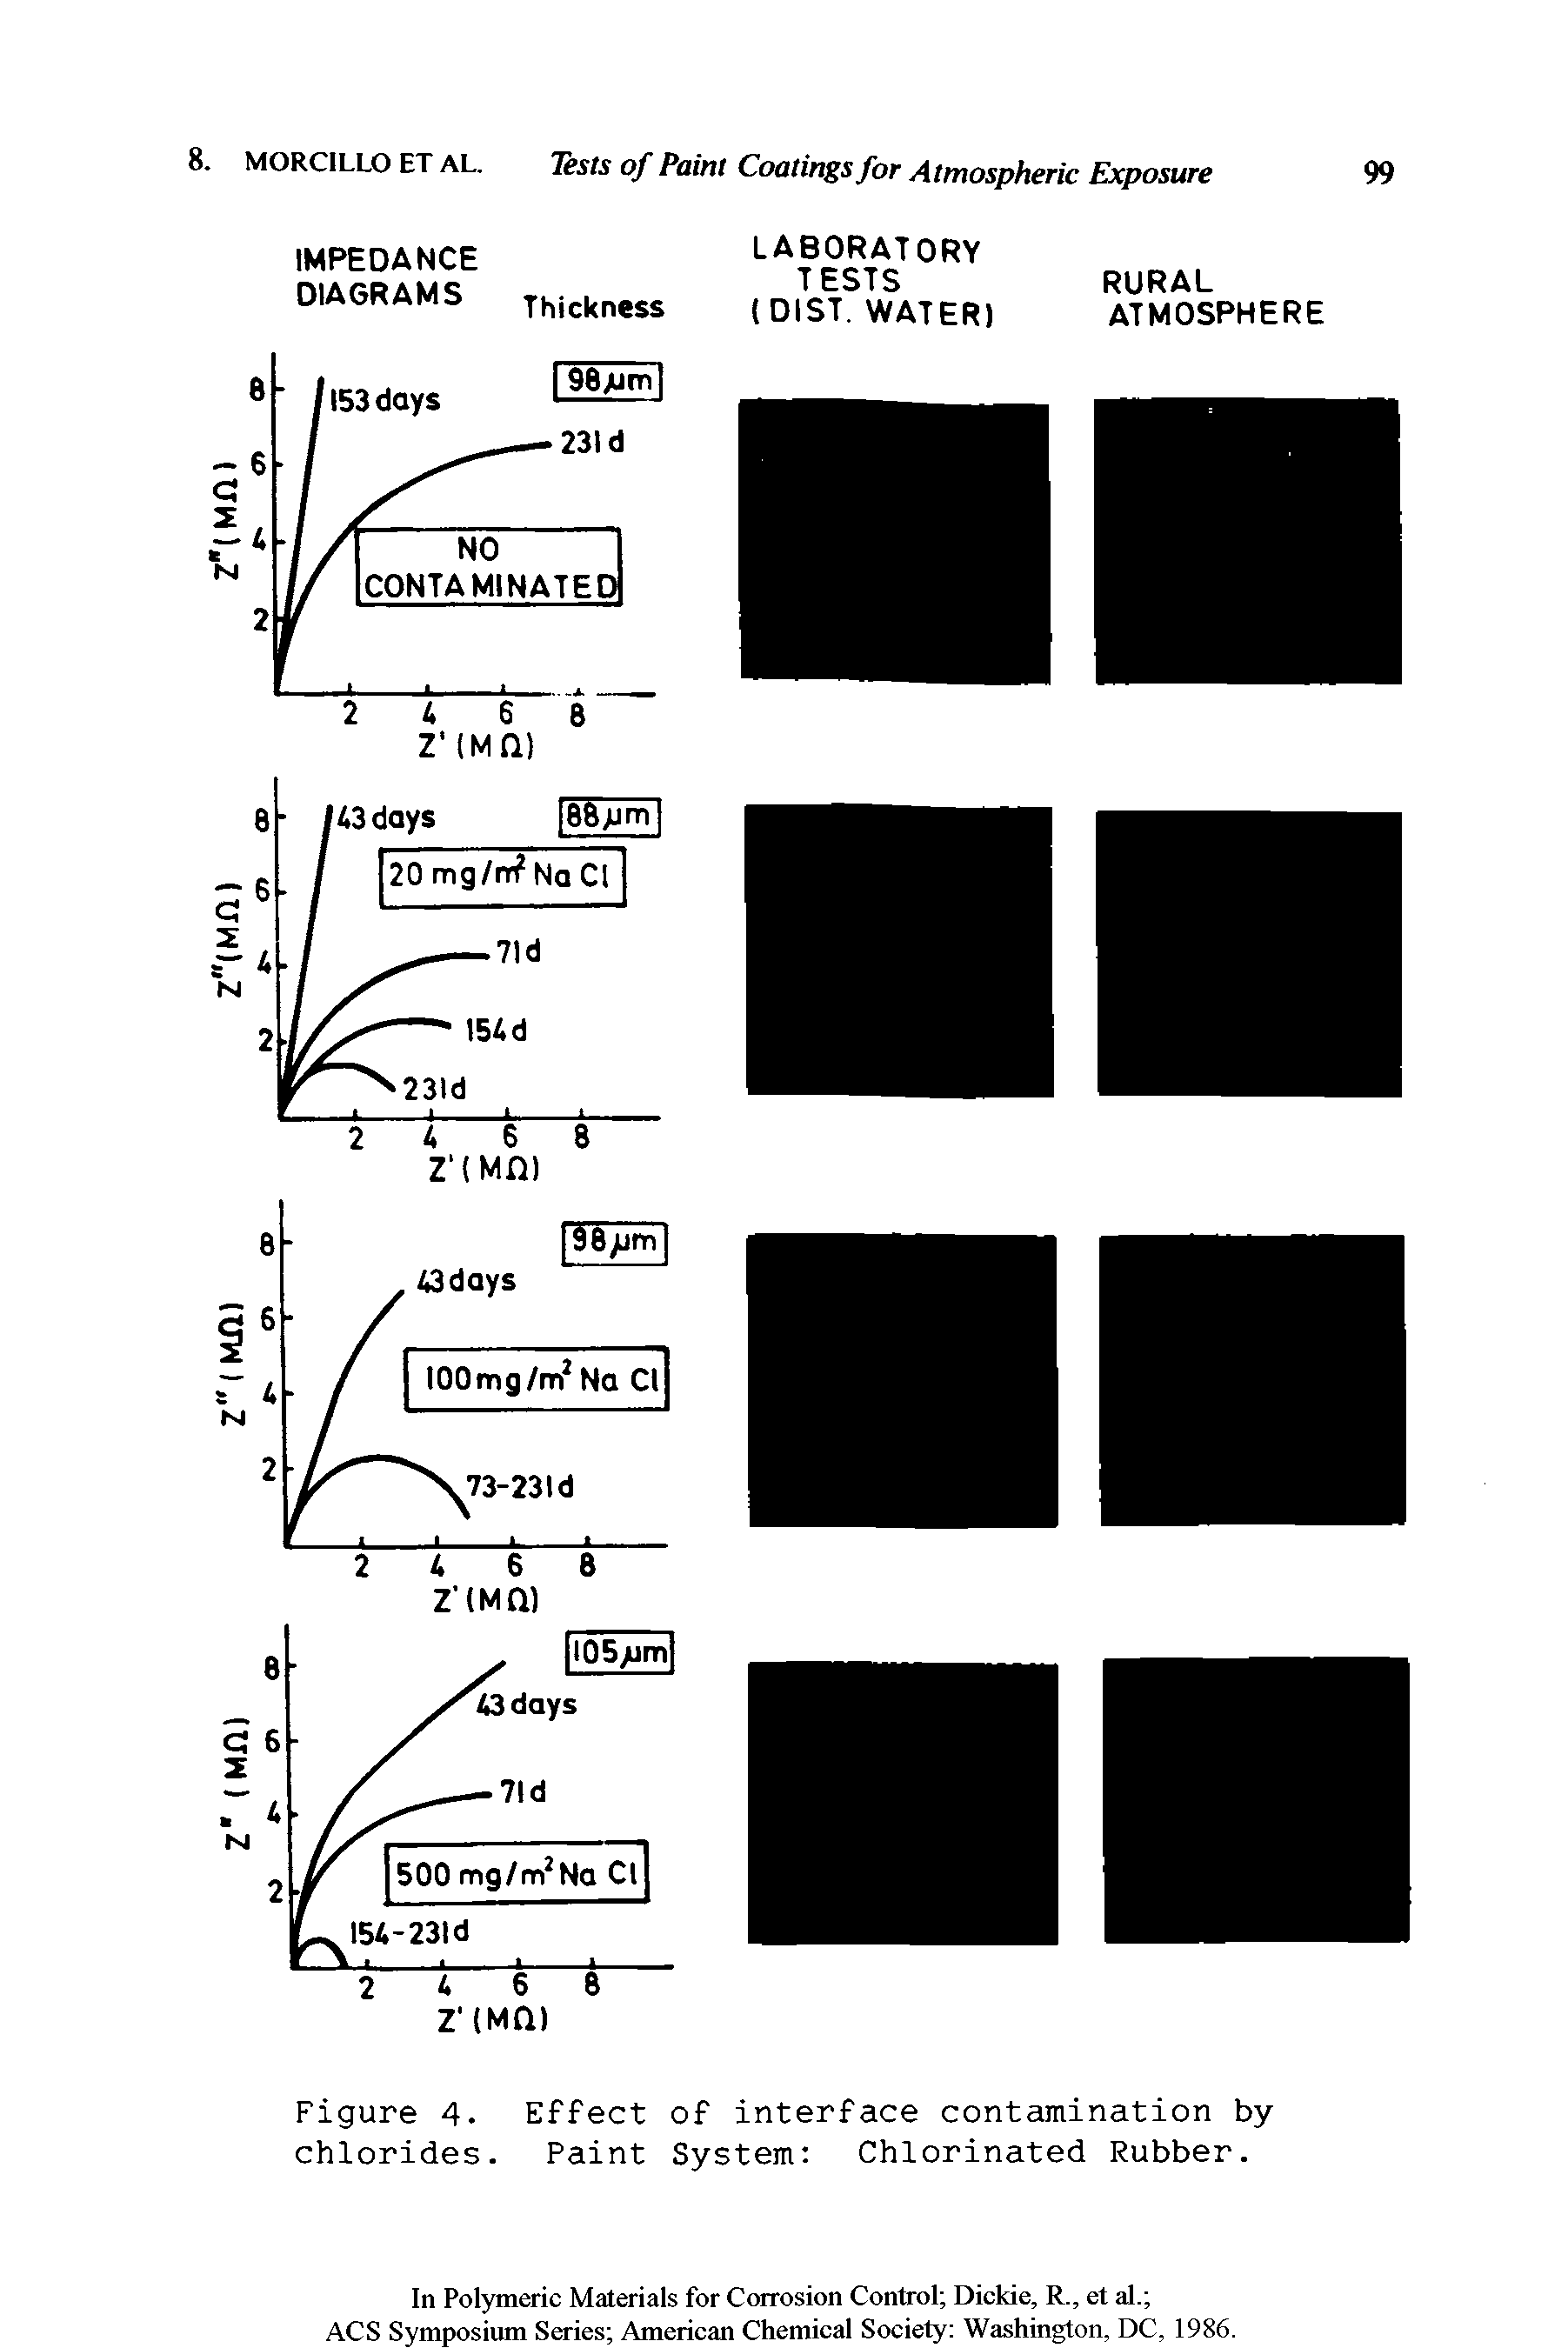 Figure 4. Effect of interface contamination by chlorides. Paint System Chlorinated Rubber.